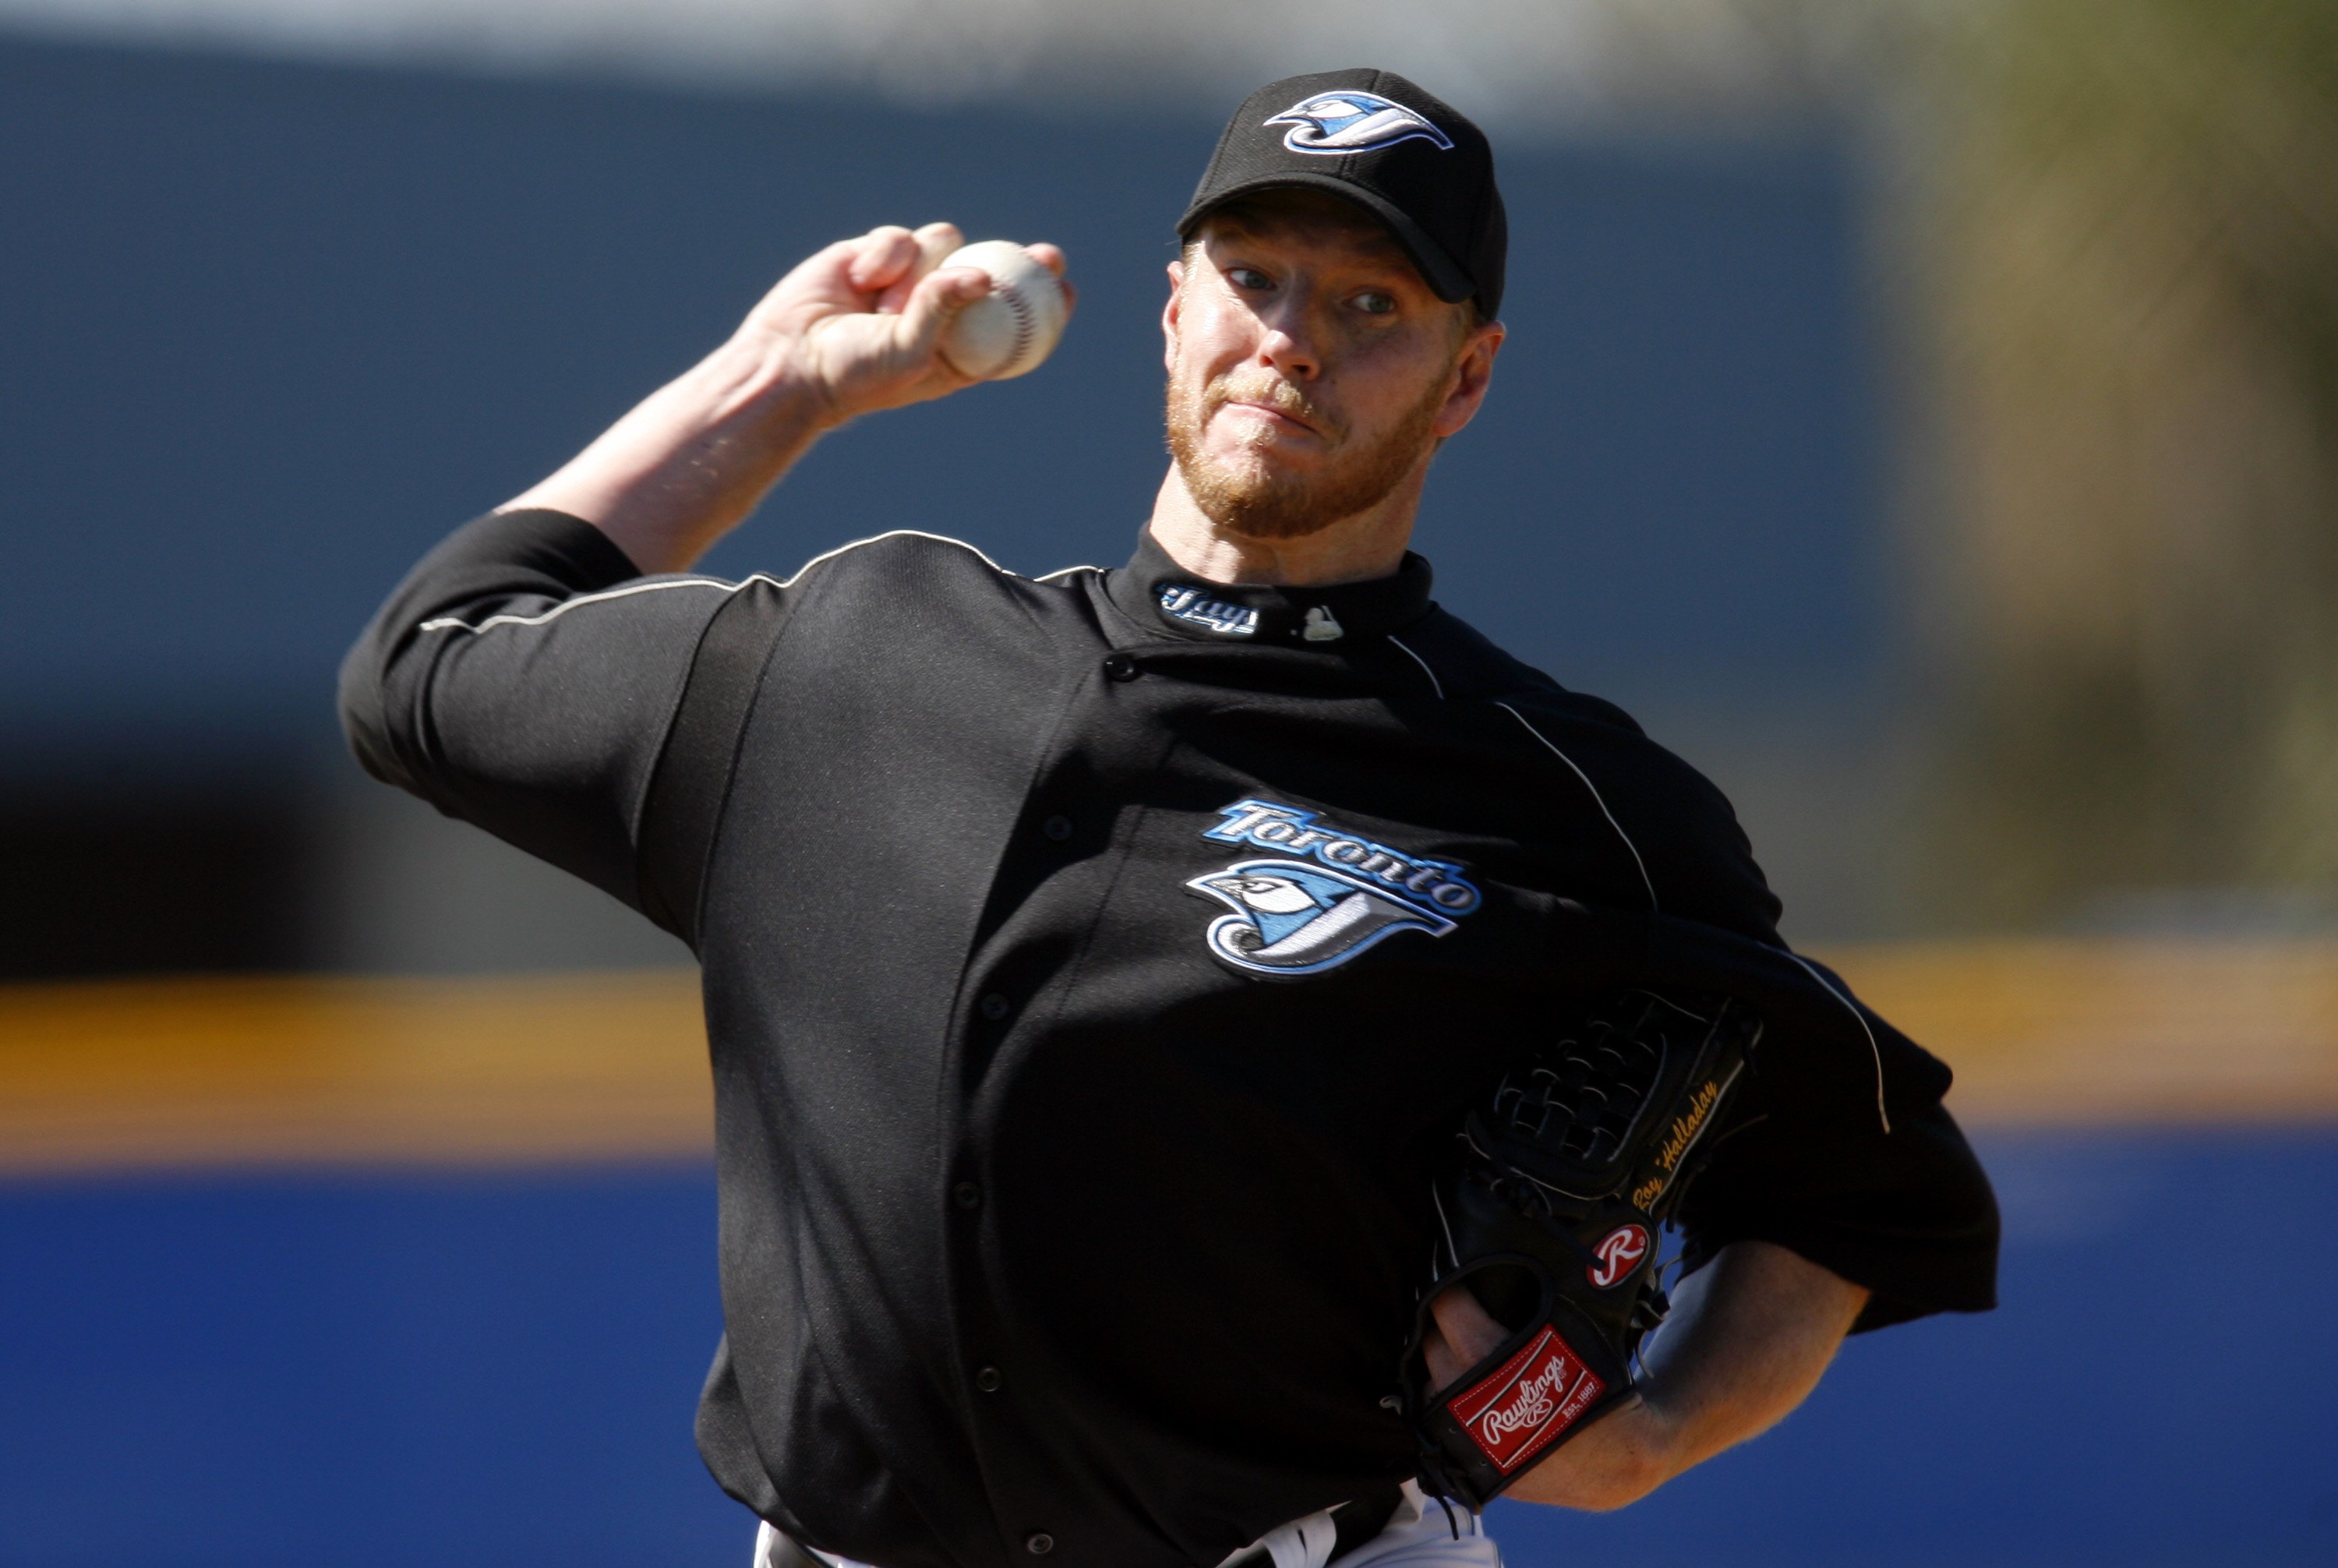 DUNEDIN, FL - FEBRUARY 27:  Pitcher Roy Halladay #32 of the Toronto Blue Jays throws a pitch during a split squad practice game on February 27, 2006 in Dunedin, Florida.  (Photo by Chris Graythen/Getty Images)